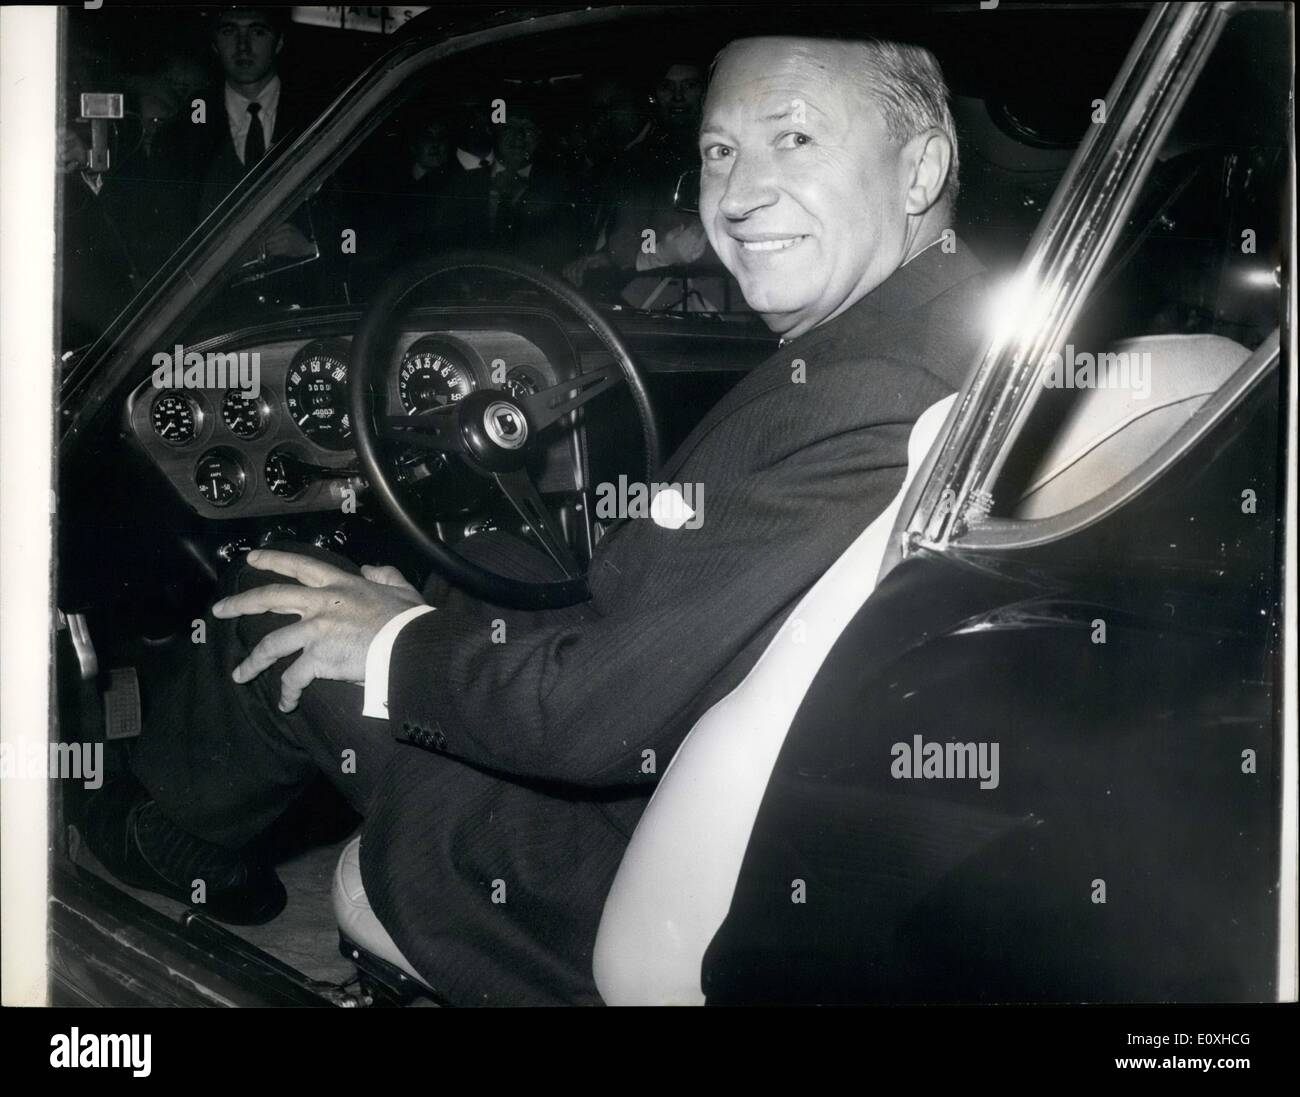 Oct. 10, 1966 - Opening of the motor show.: Photo shows Mr. Edward Heath, seen at the wheel of the Aston Martin DB6, after opening the Motor Show at Earl's Court today. Stock Photo